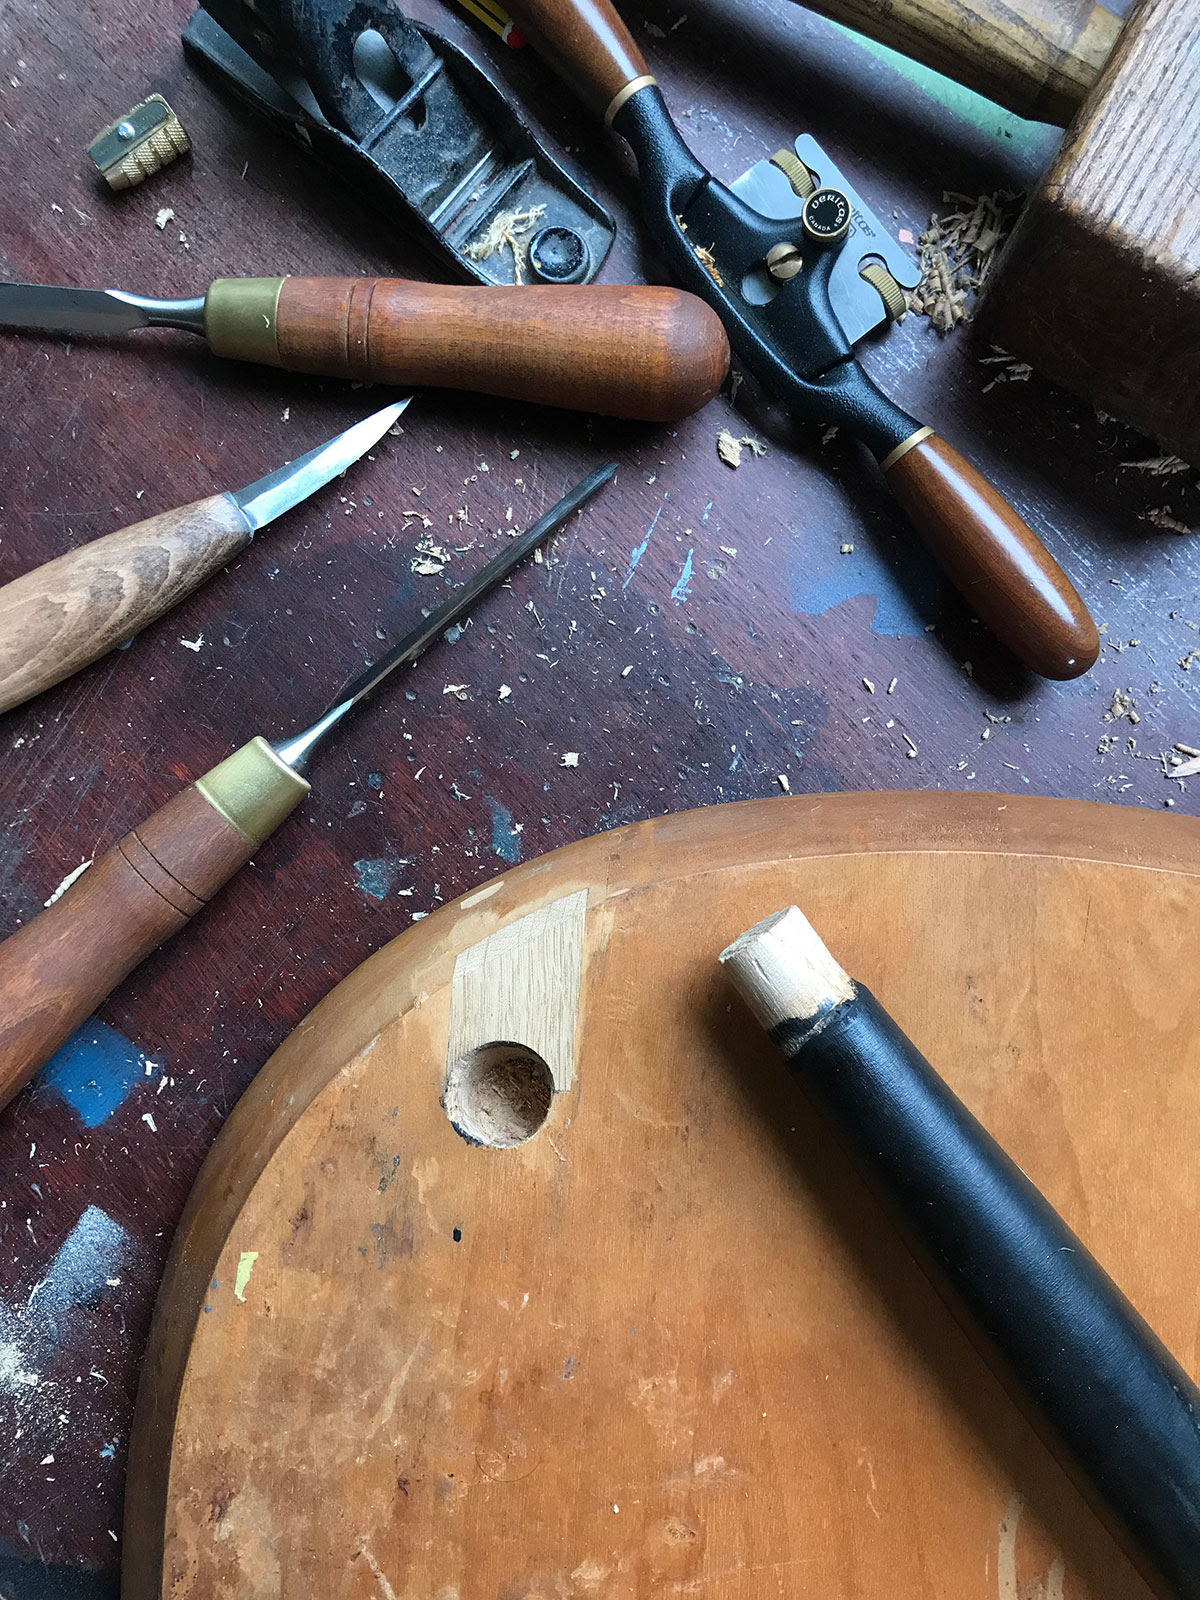 Tools used for restoration work